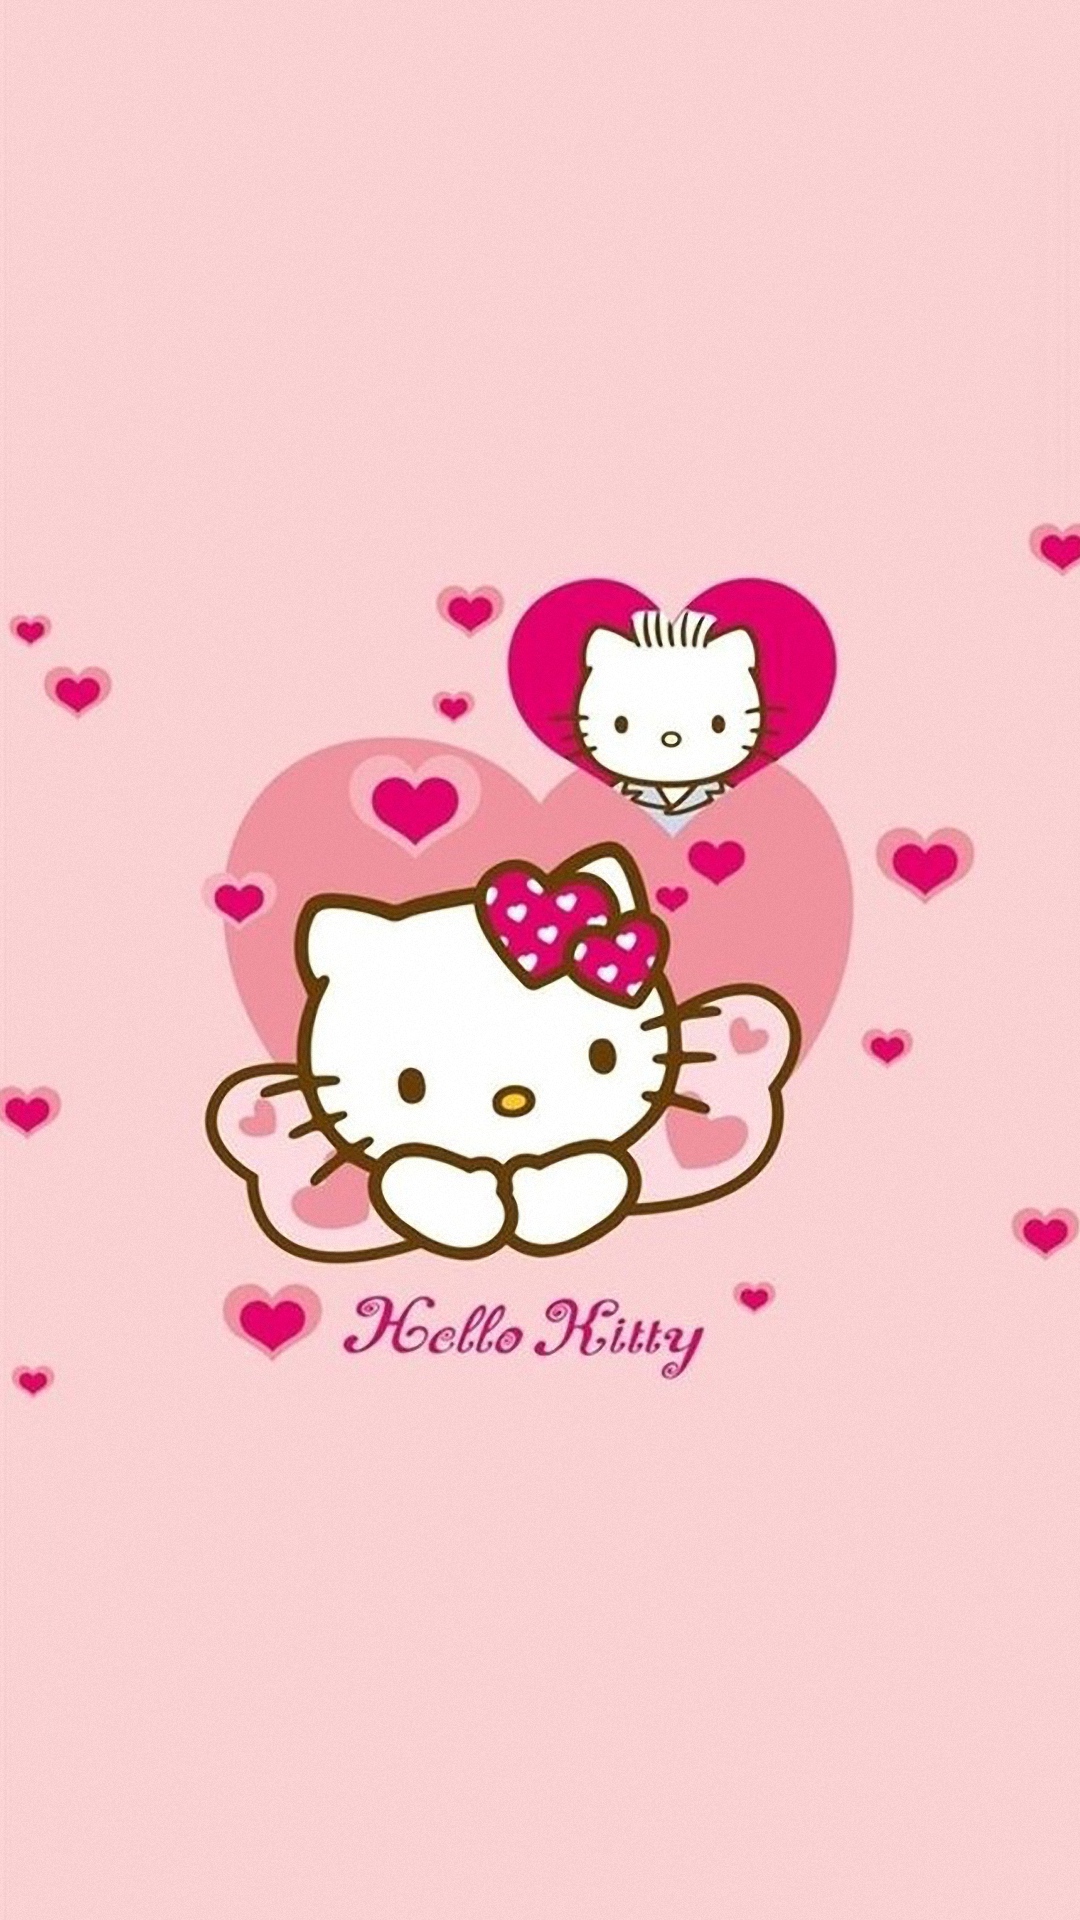 Free download Cute Hello Kitty galaxy s4 s5 Wallpapers HD 1080x1920